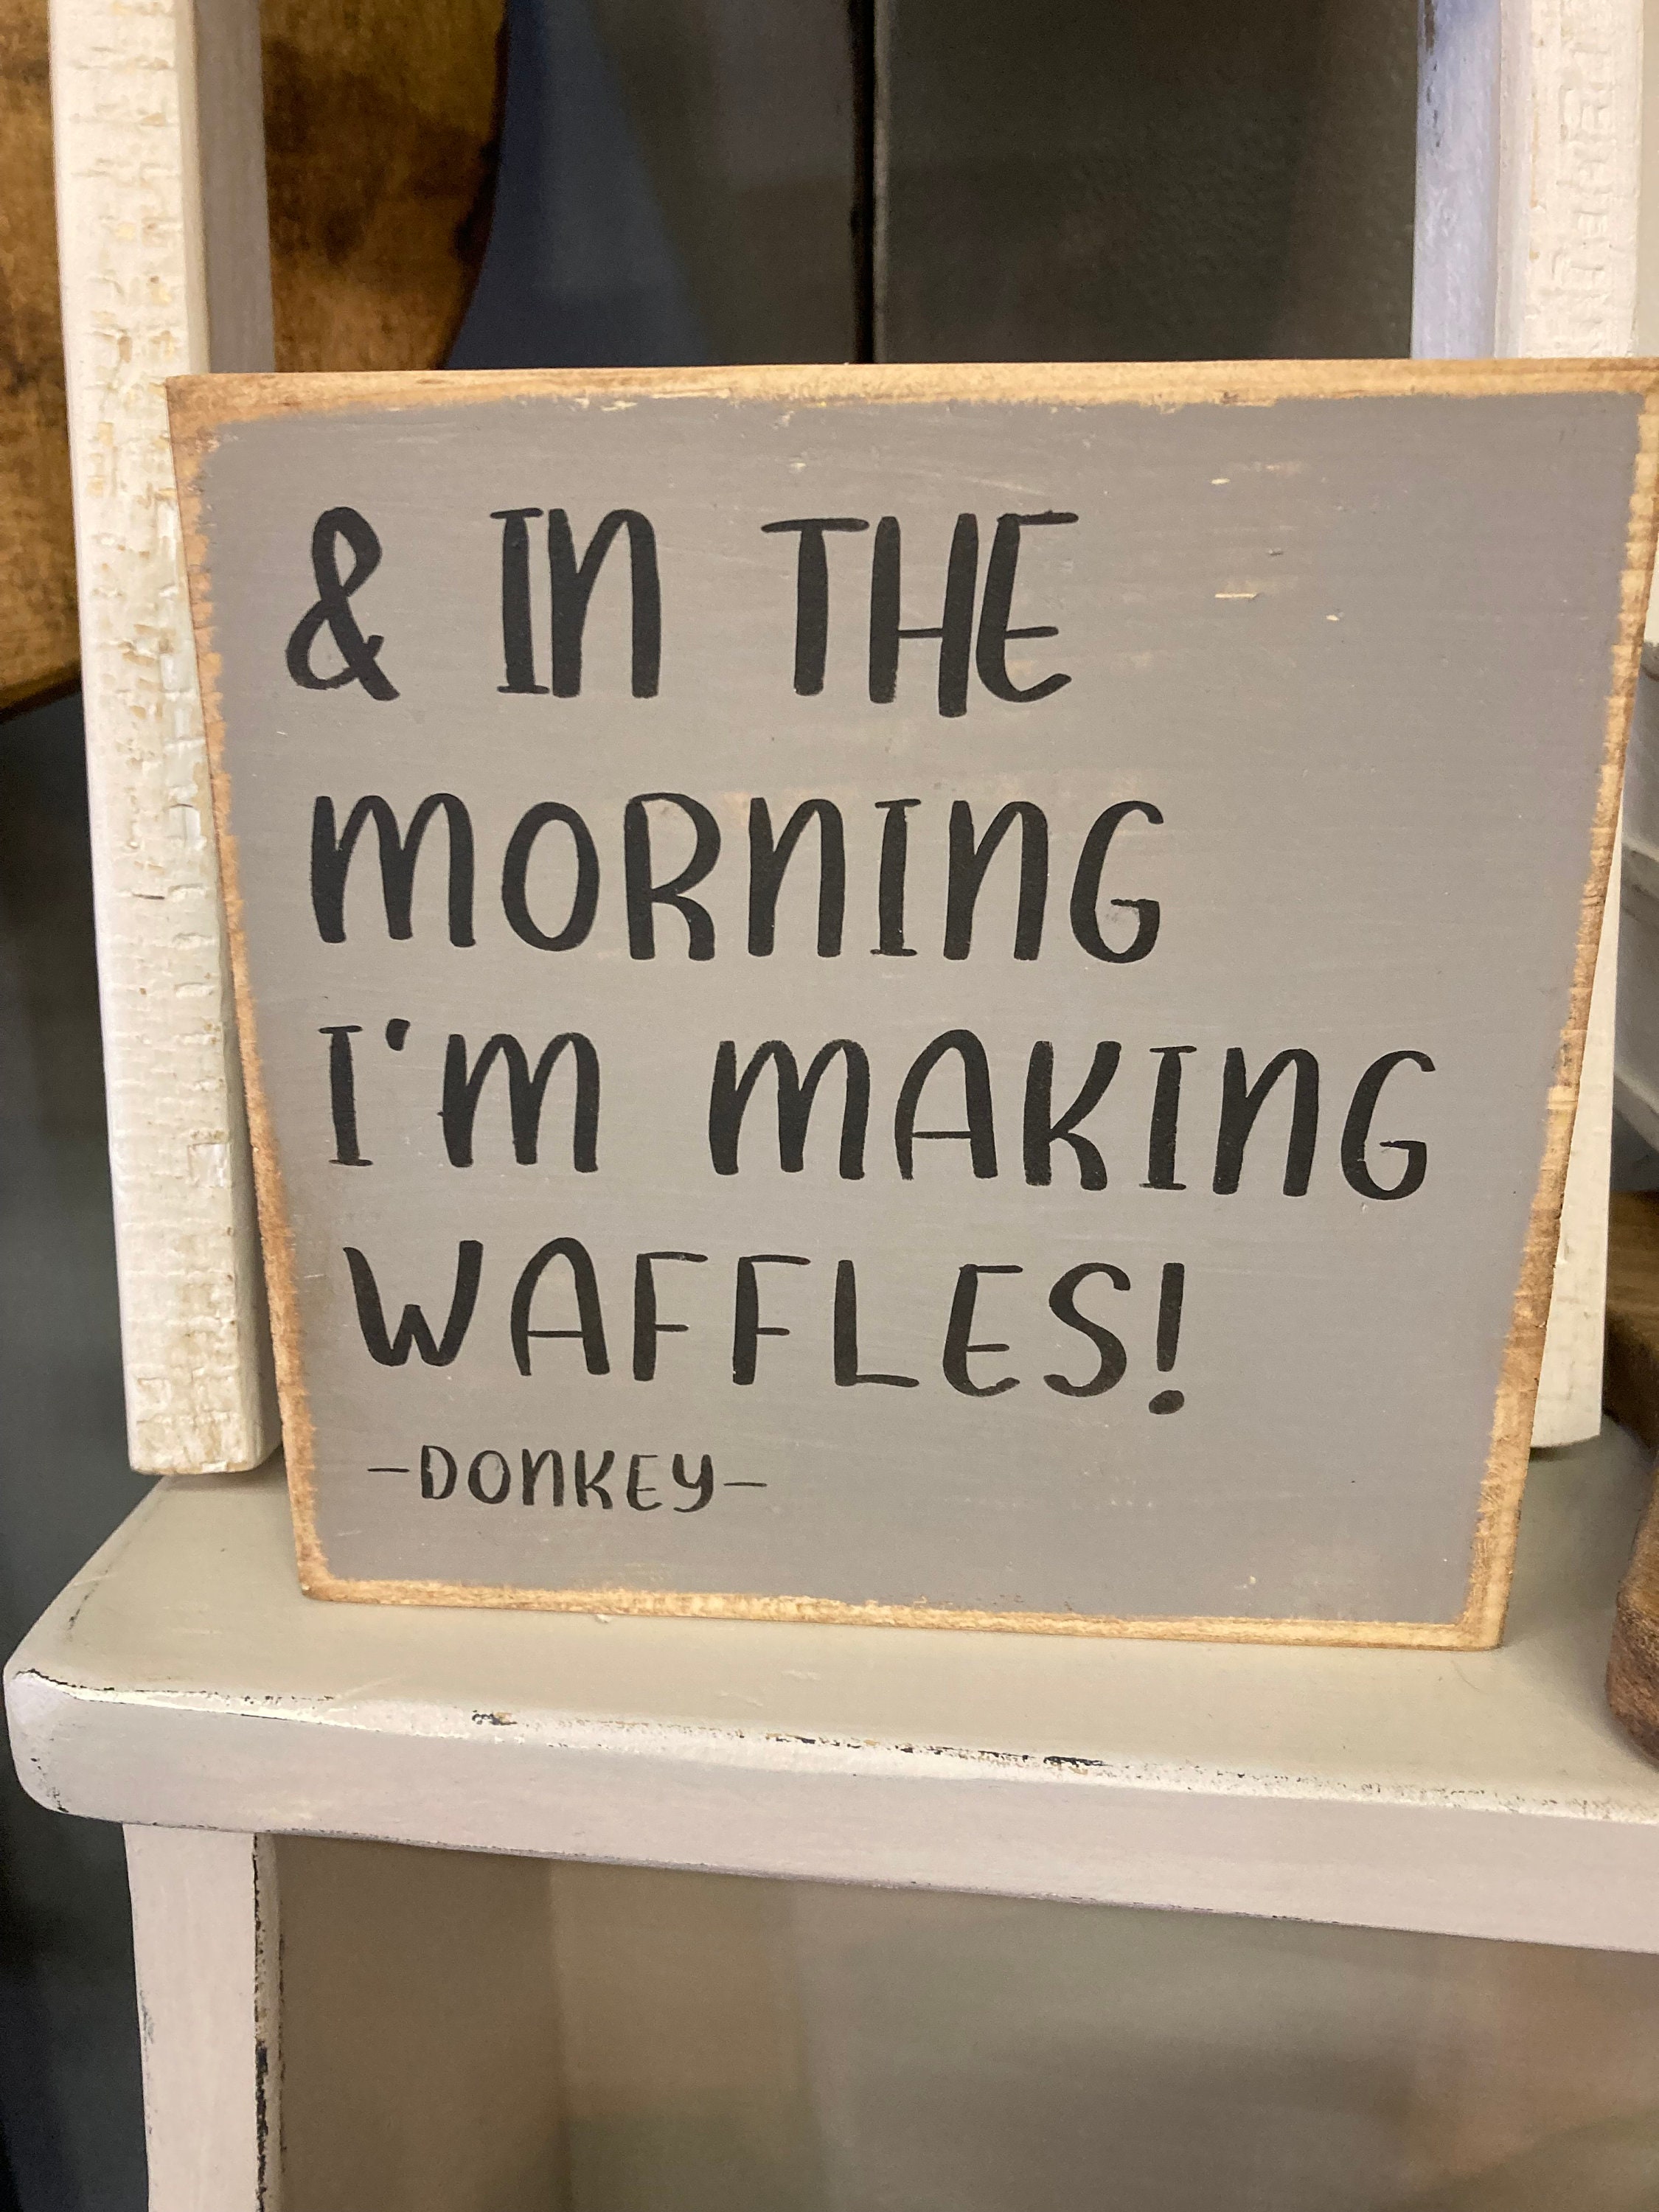 And in the morning i'm making waffles gif